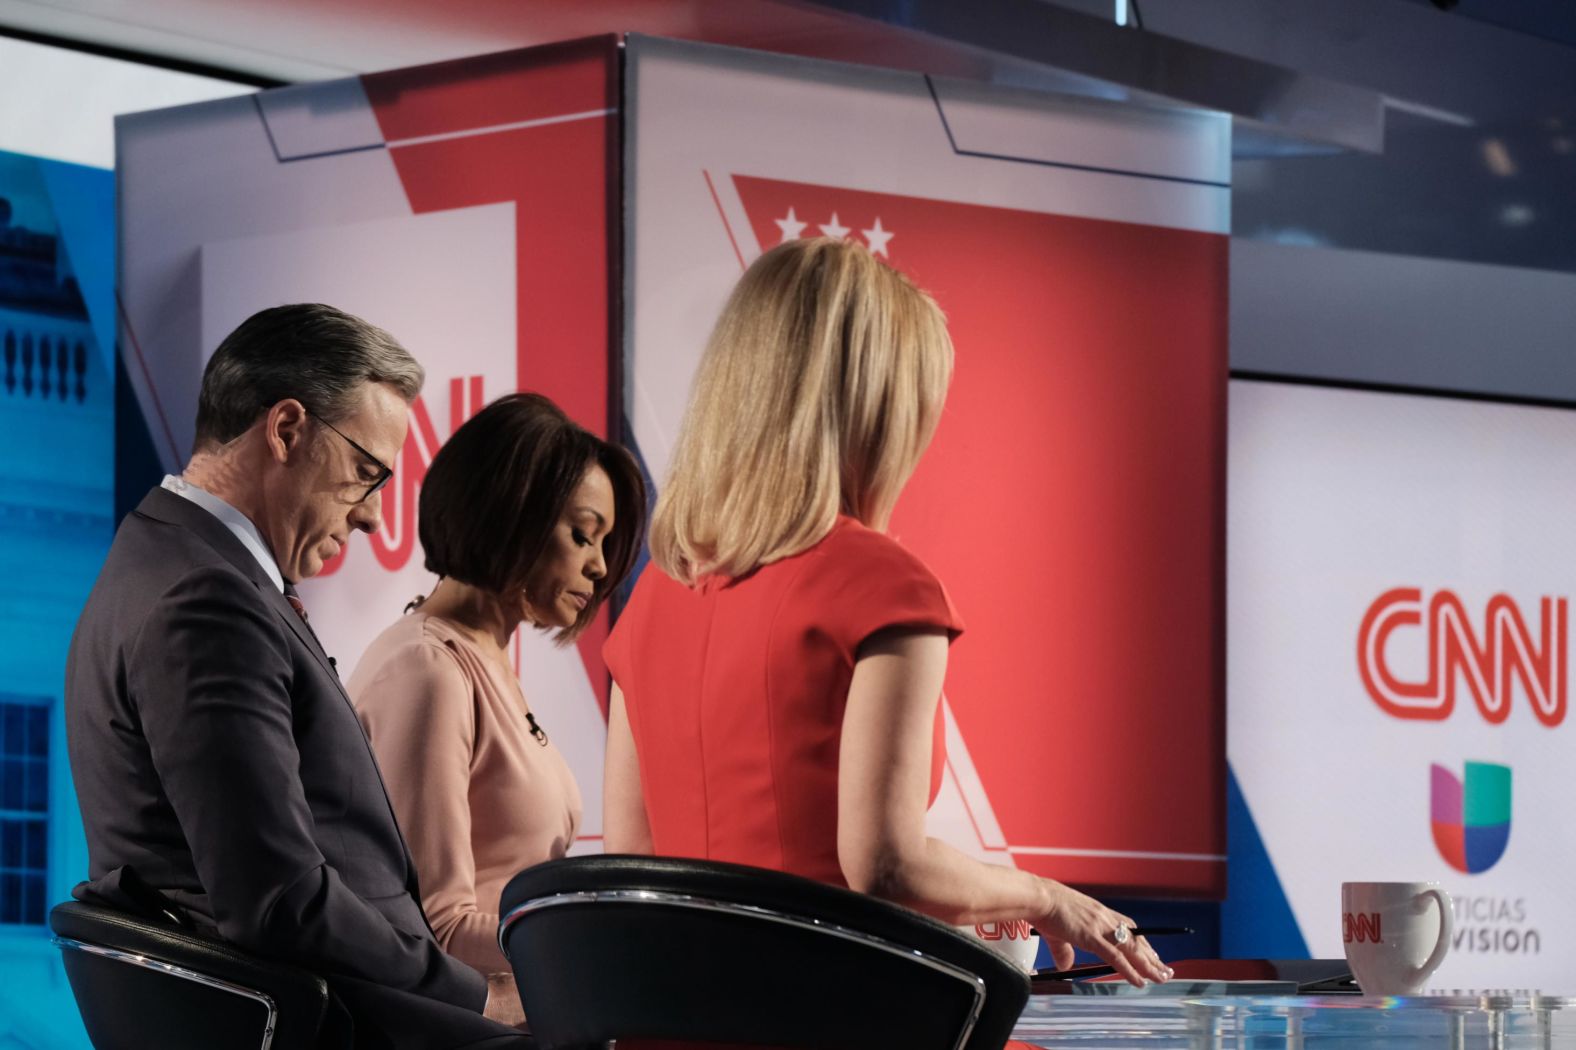 The moderators look over notes during a commercial break. From left are CNN's Jake Tapper, Univision's Ilia Calderón and CNN's Dana Bash.